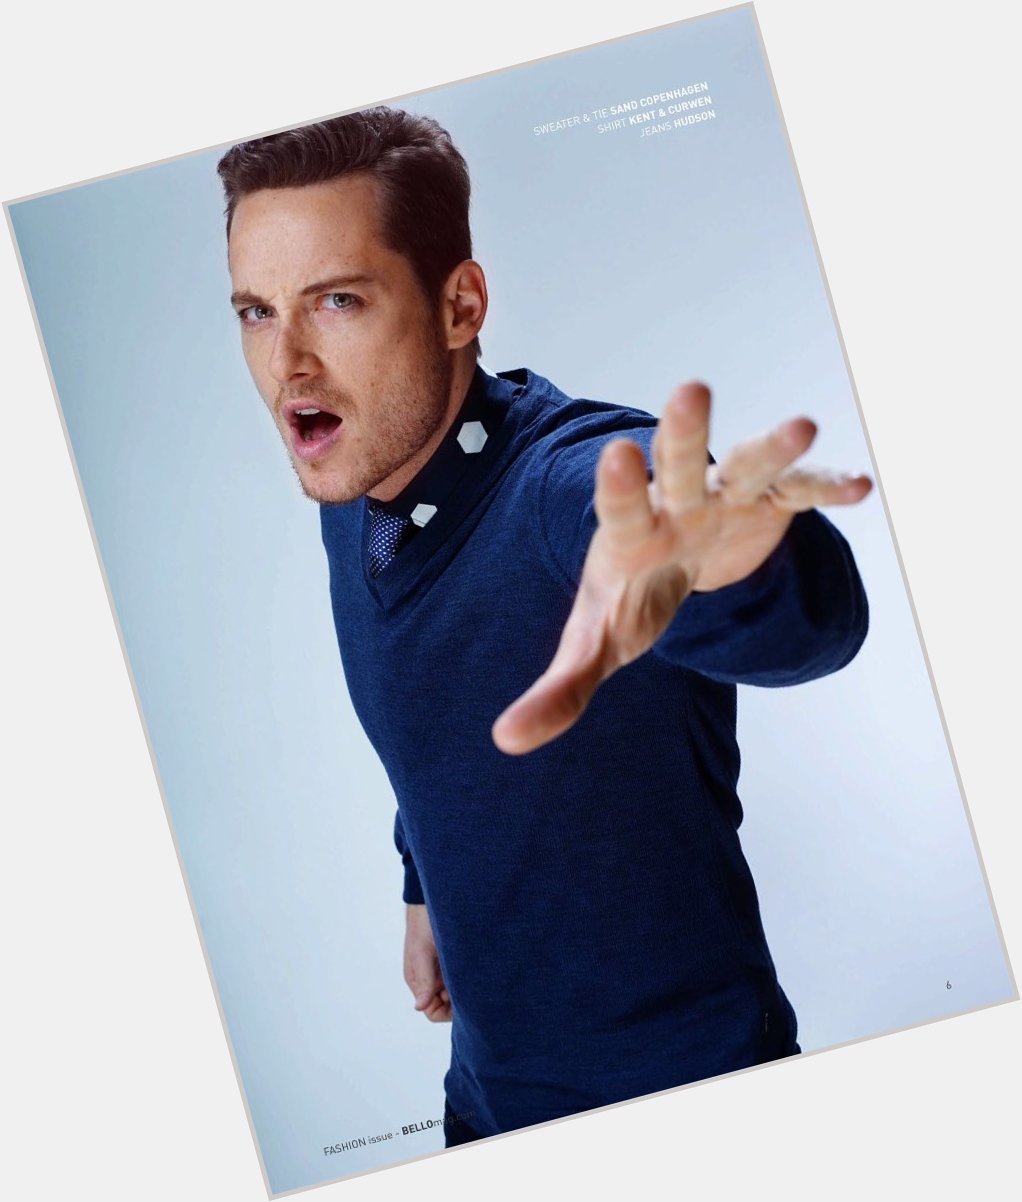 Today is the birthday of Jesse Lee Soffer, so we wish him a good and happy birthday. 